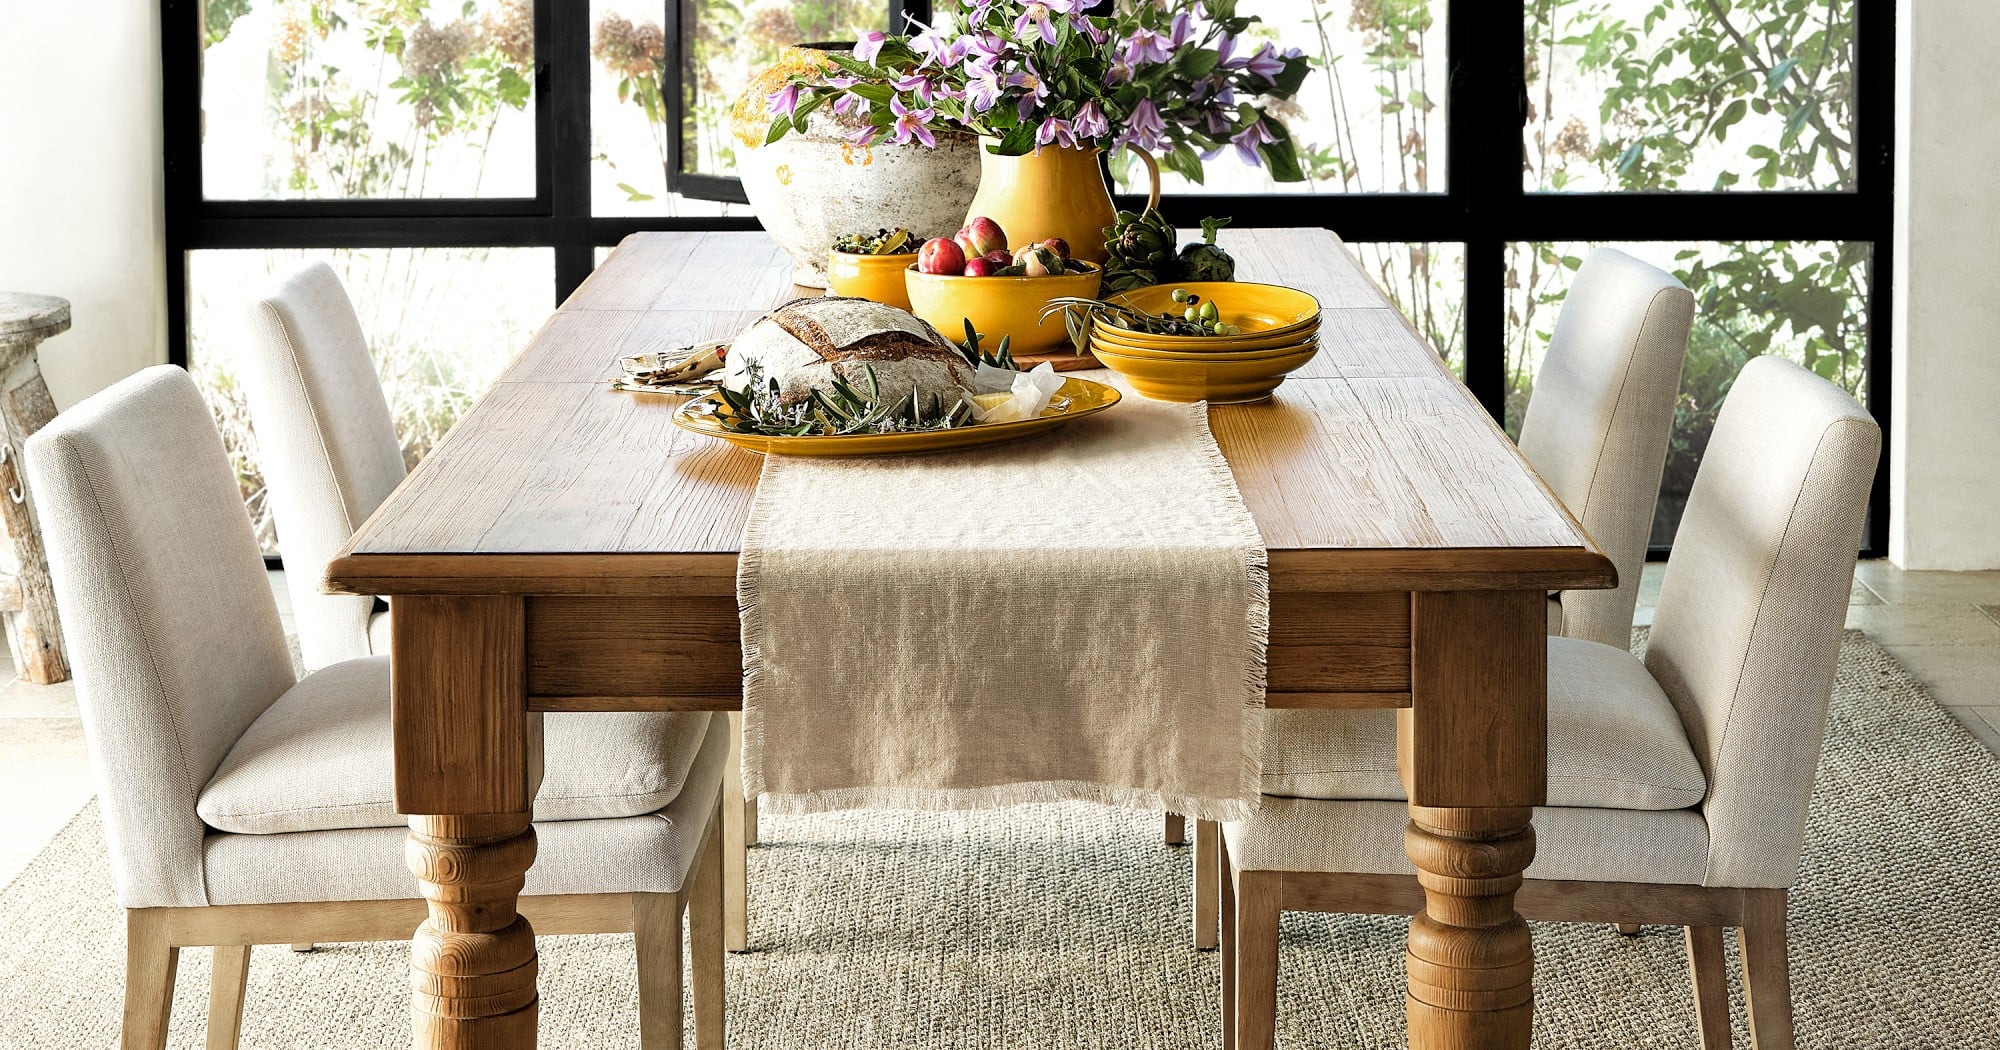 10 Farmhouse-Style Dining Tables That Will Become the Heart of Your Home